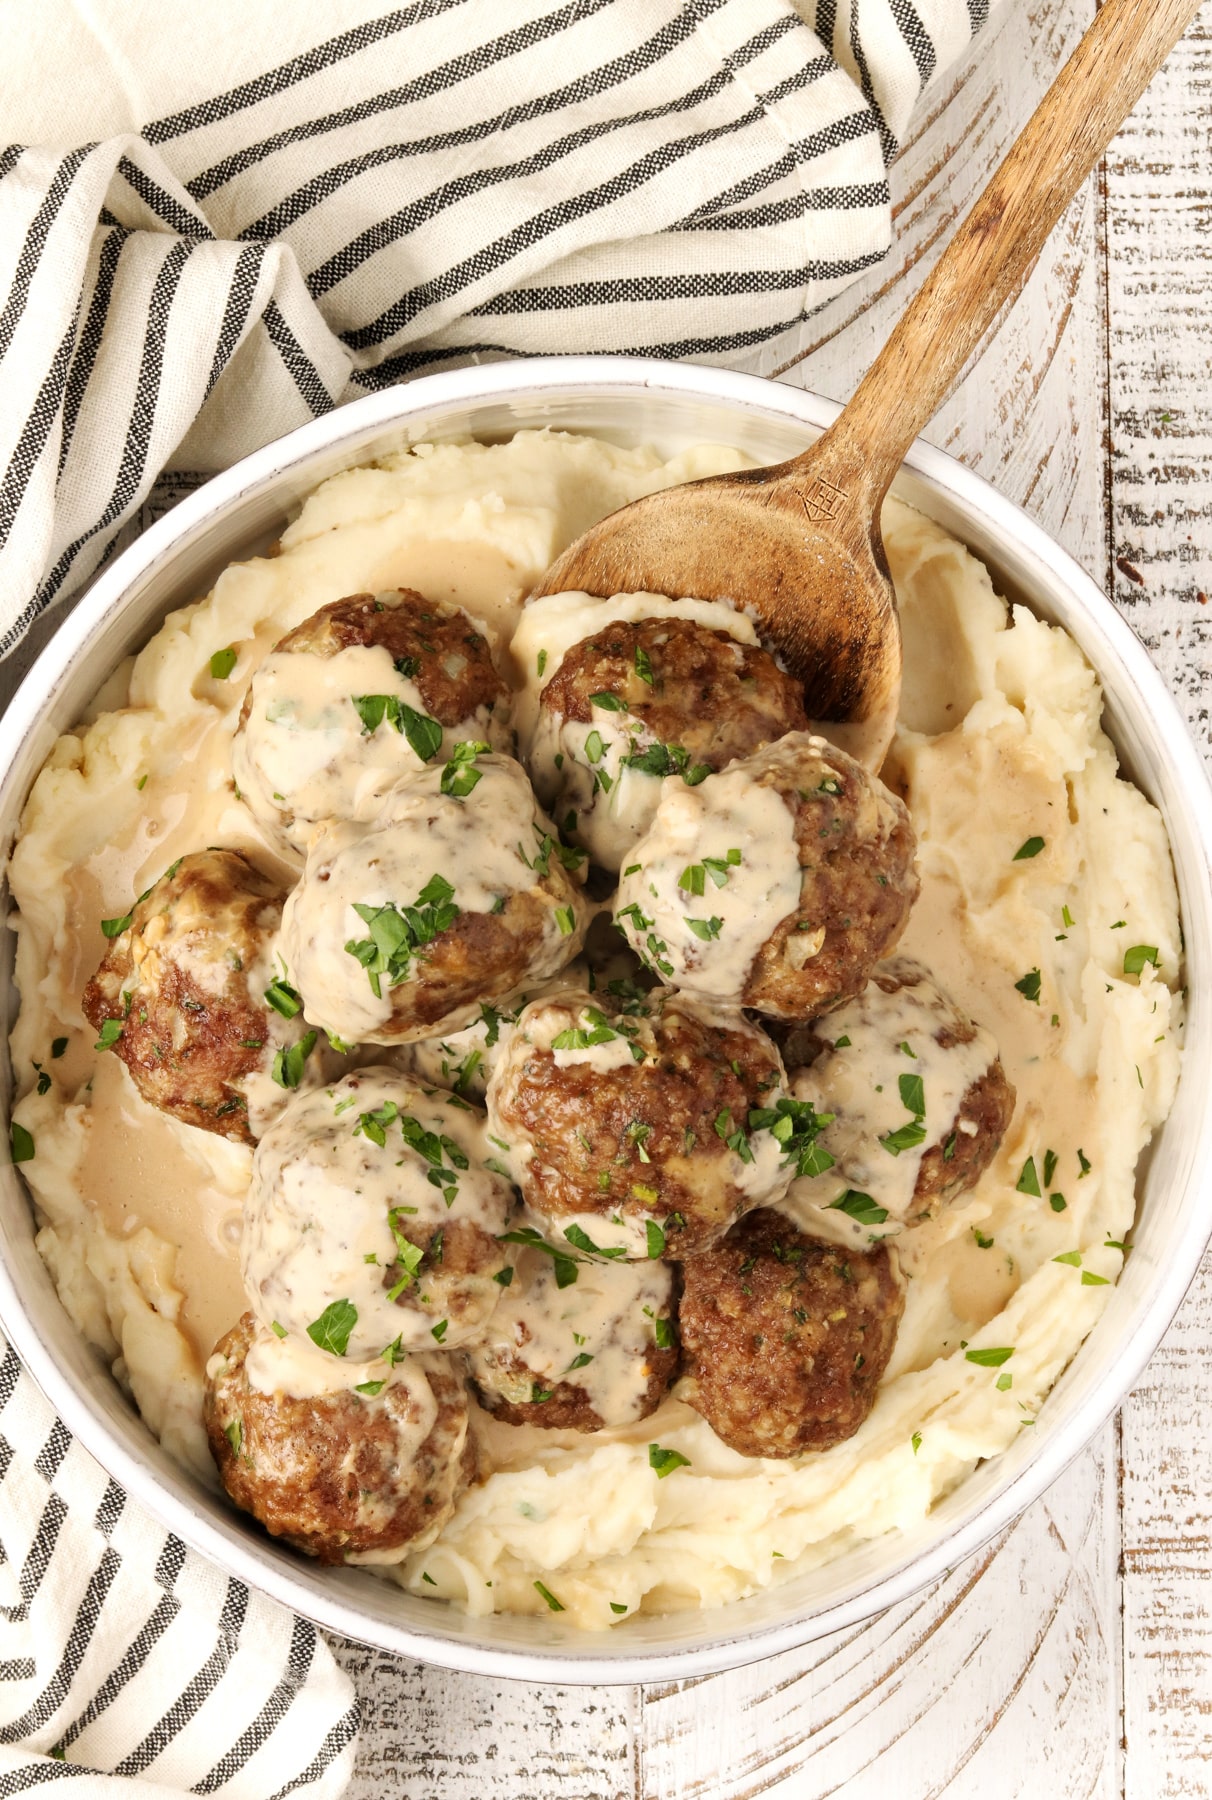 Instant Pot Swedish Meatballs piled into a large white bowl of mashed potatoes.